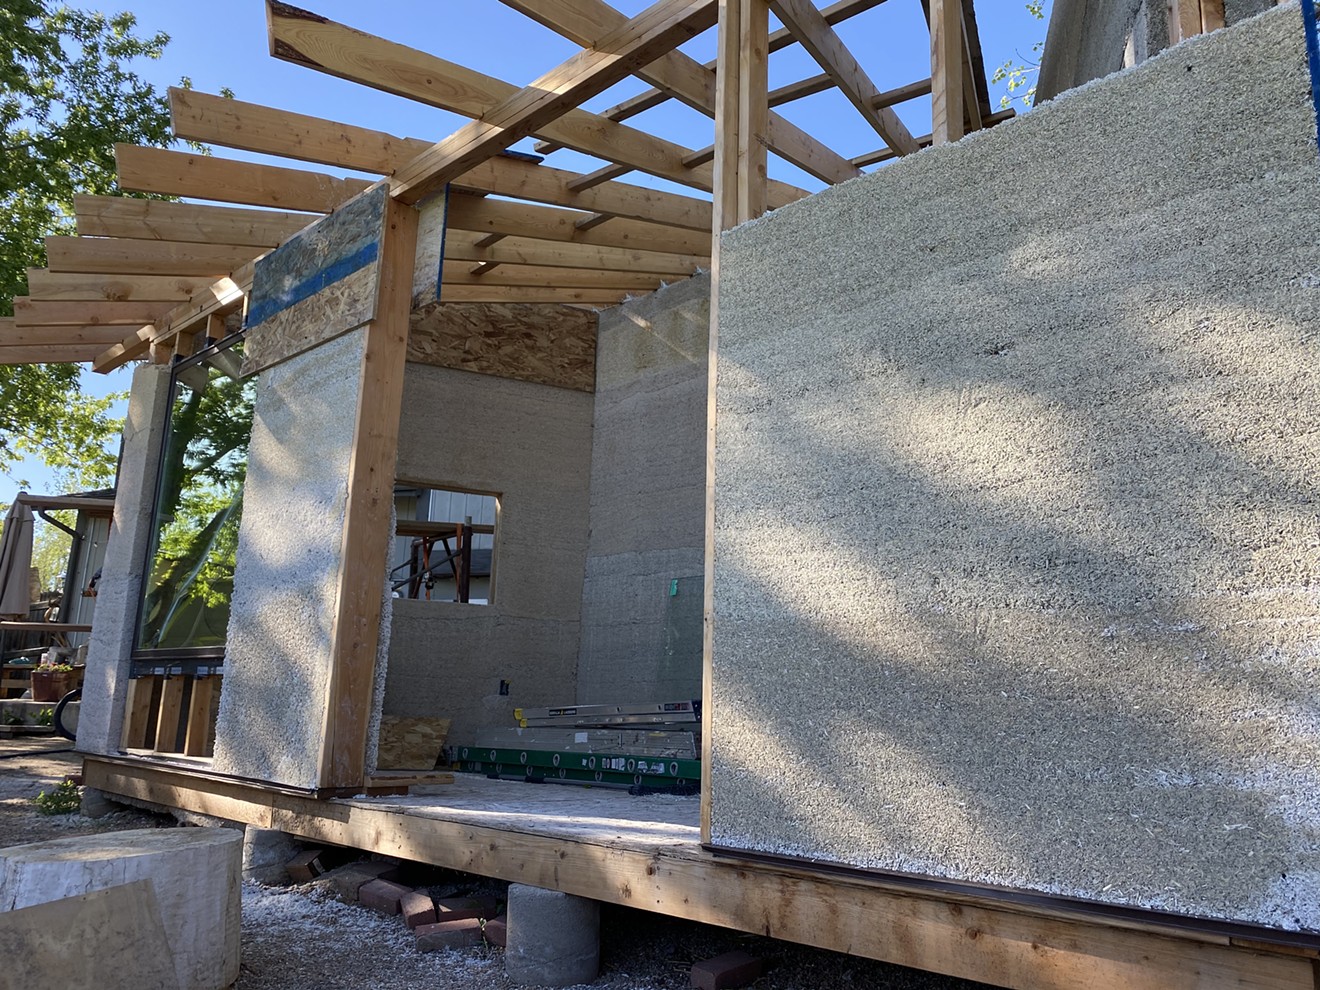 Hempcrete is useful for commercial and residential builds, but government contracts haven't come up yet.